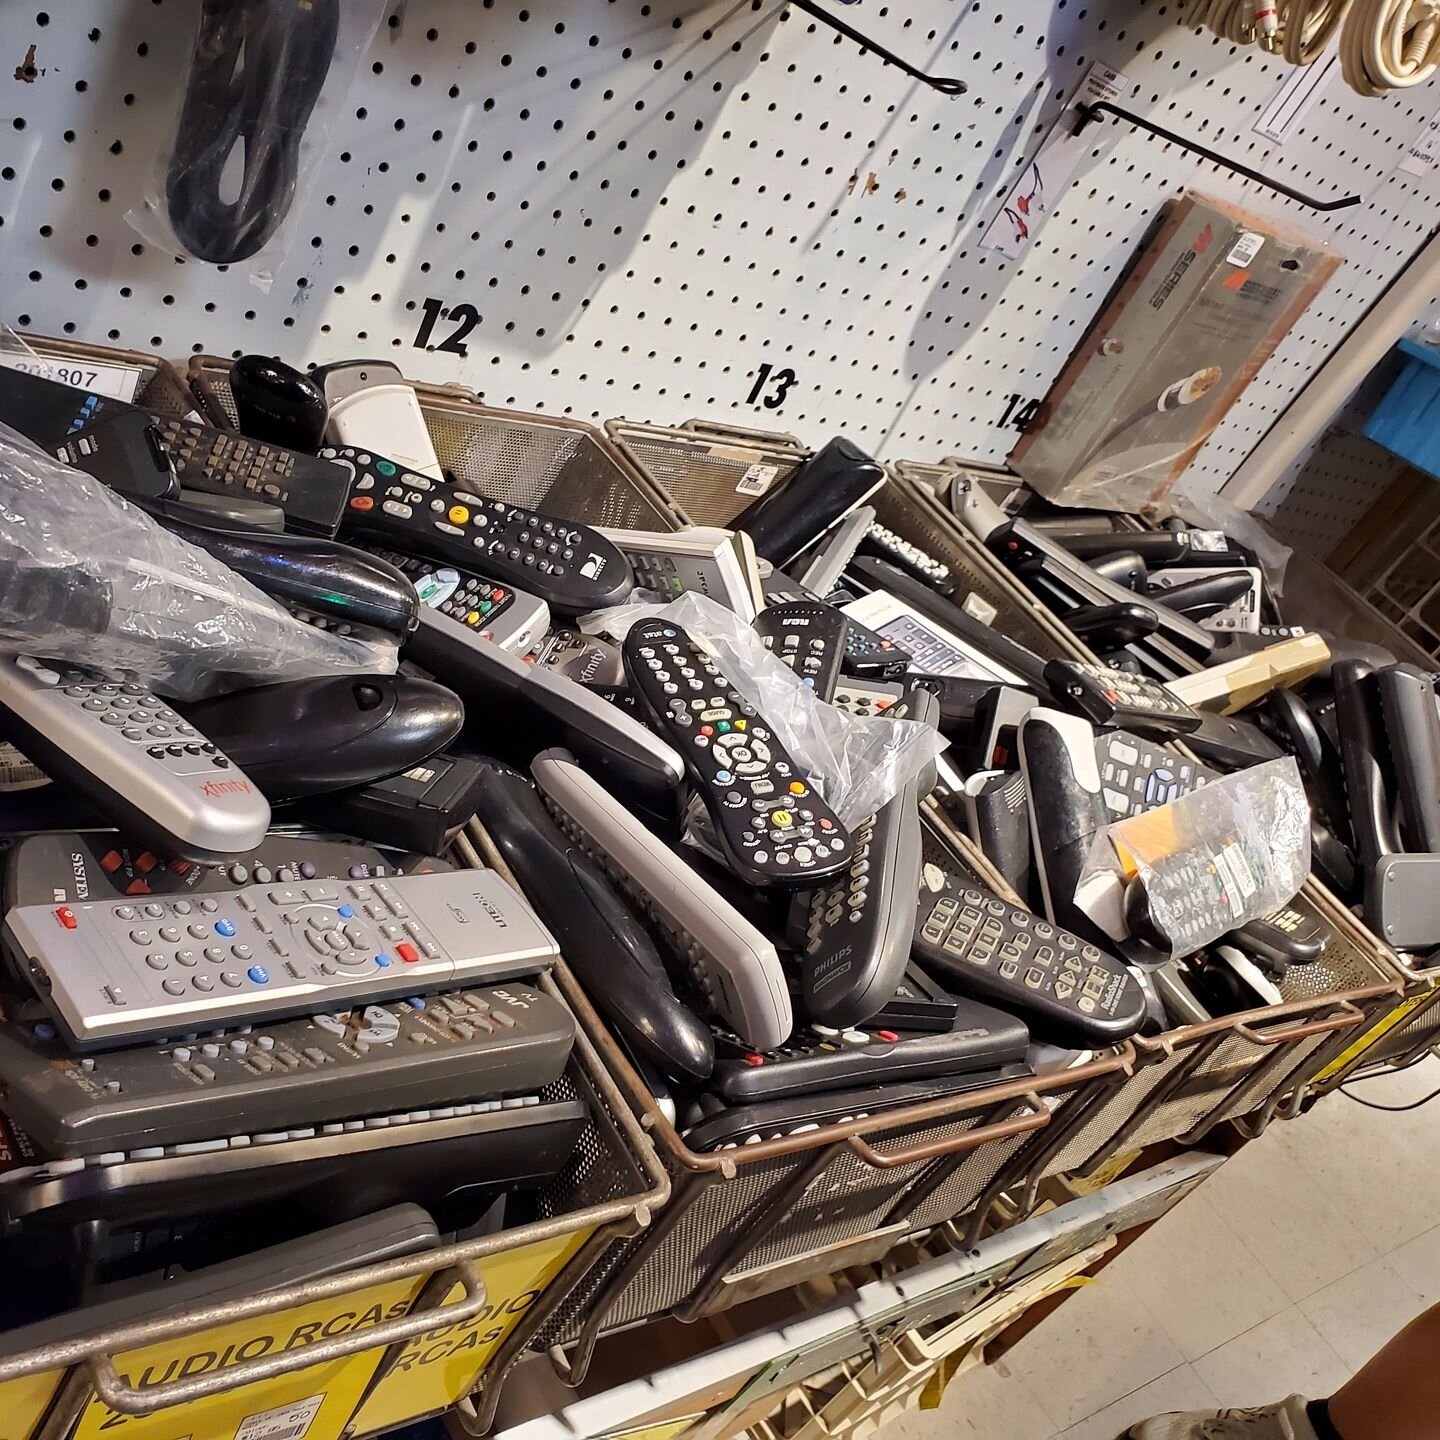 Hey guys, I found all the lost remotes!!
#epo